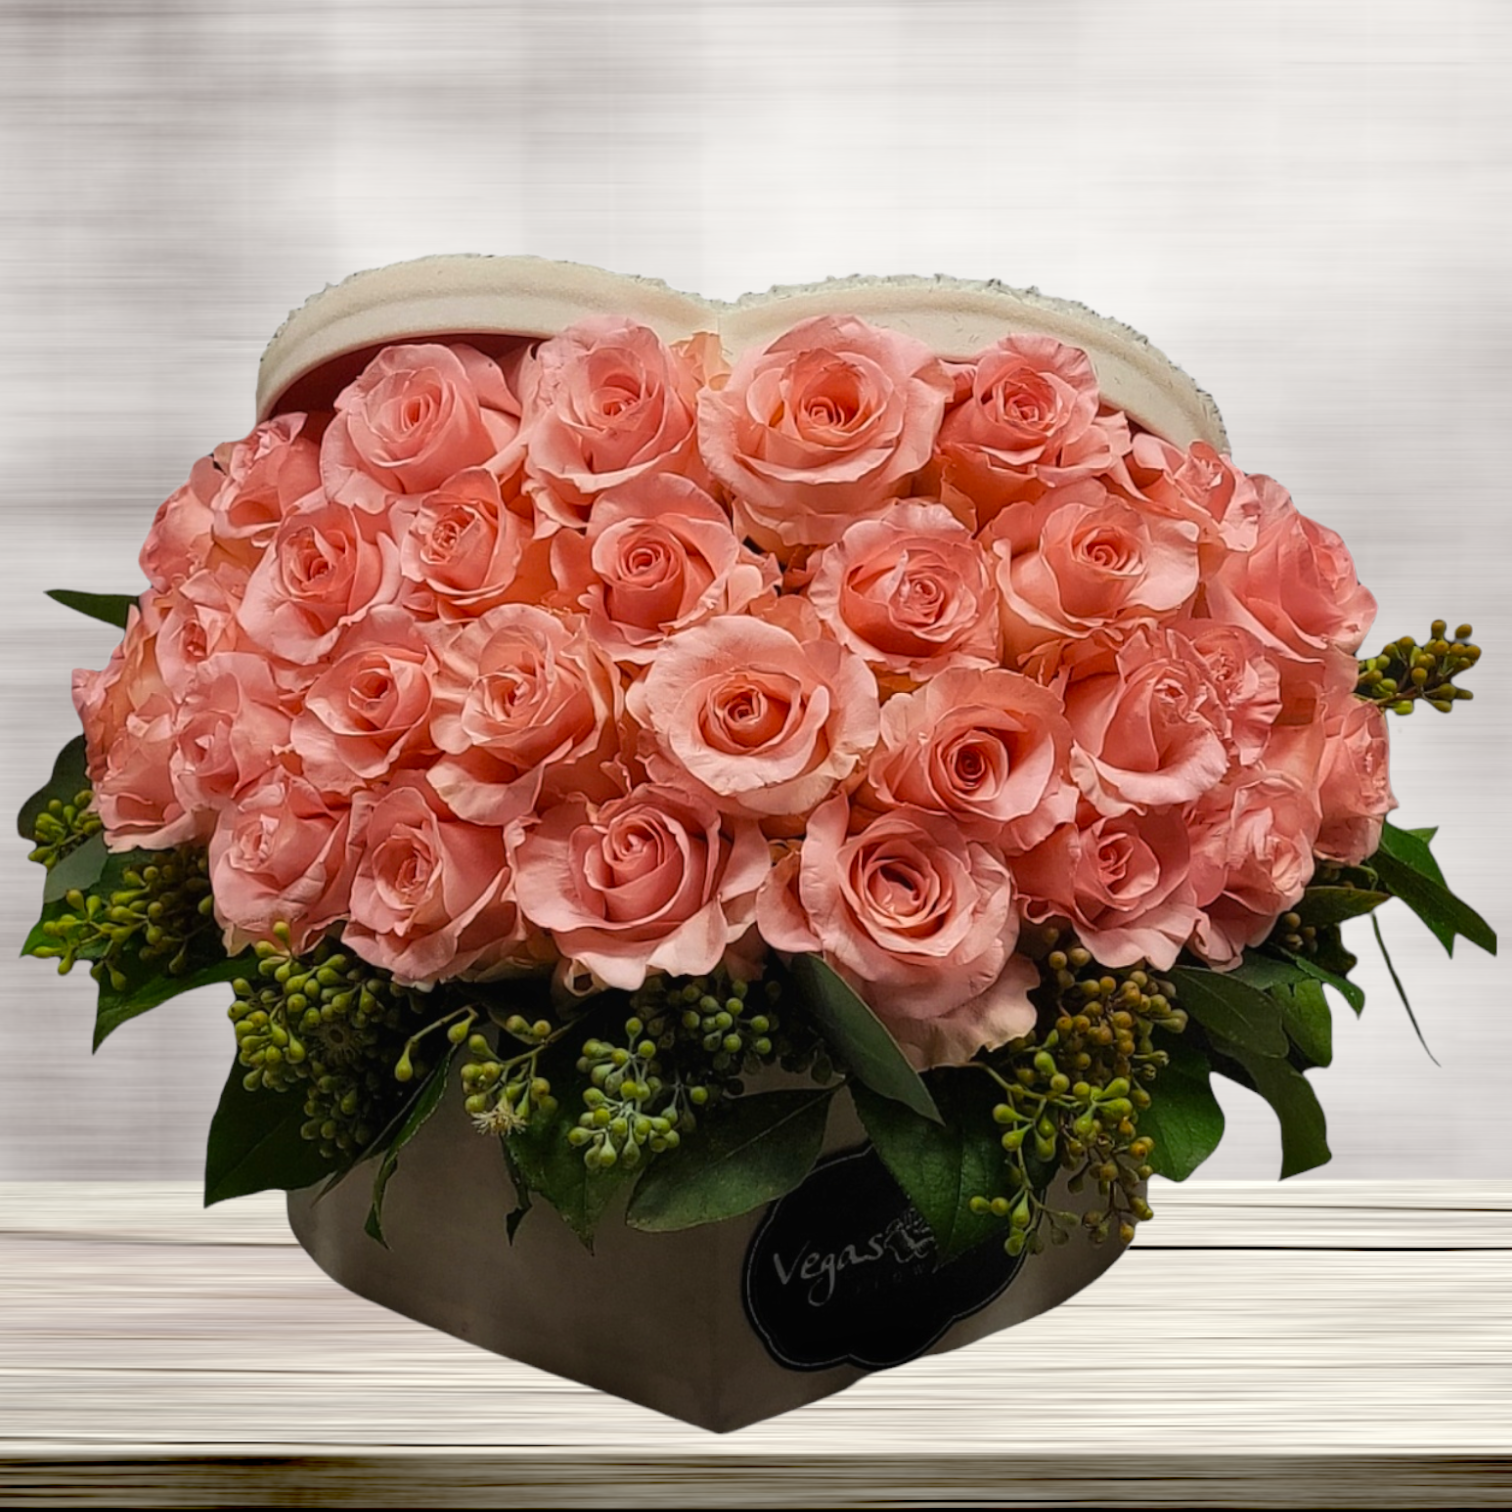 Send Buy Pink Roses In Heart Box Flowers Online Probunga Online by Probunga